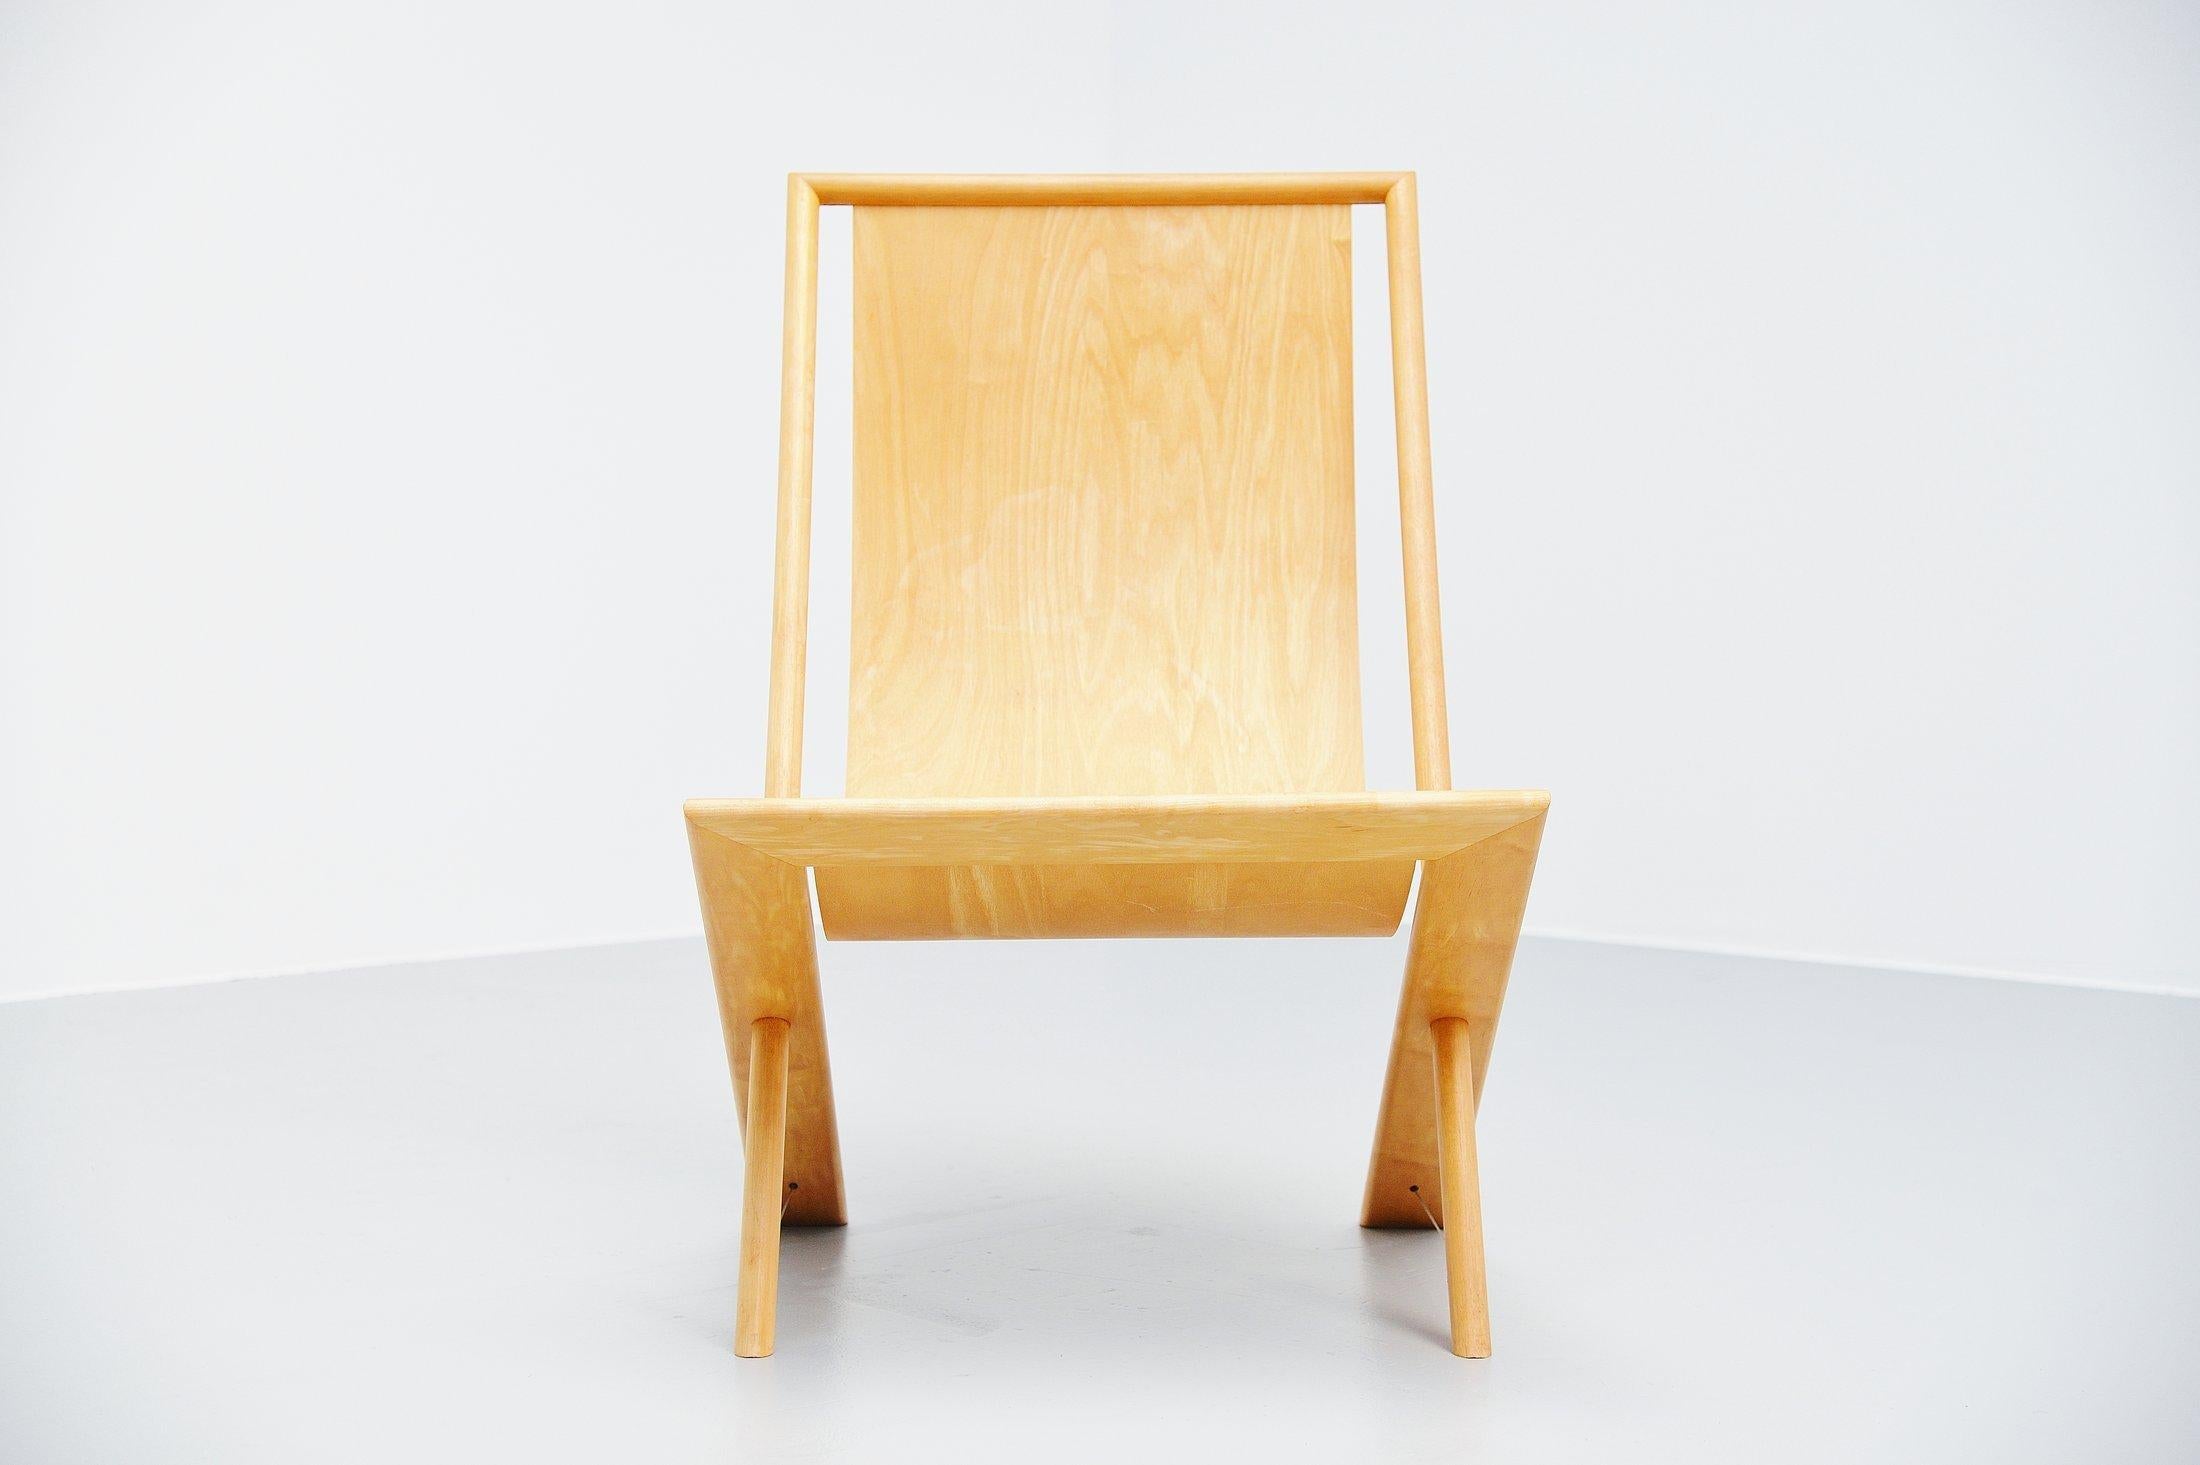 Very nice lounge chair designed and made by Frits Swart, Holland, 1979. Frits swart was a poet and craftsman. This chair has an amazing construction where a thin flexible plywood seat is fixed between the frame. The legs are supported by a metal